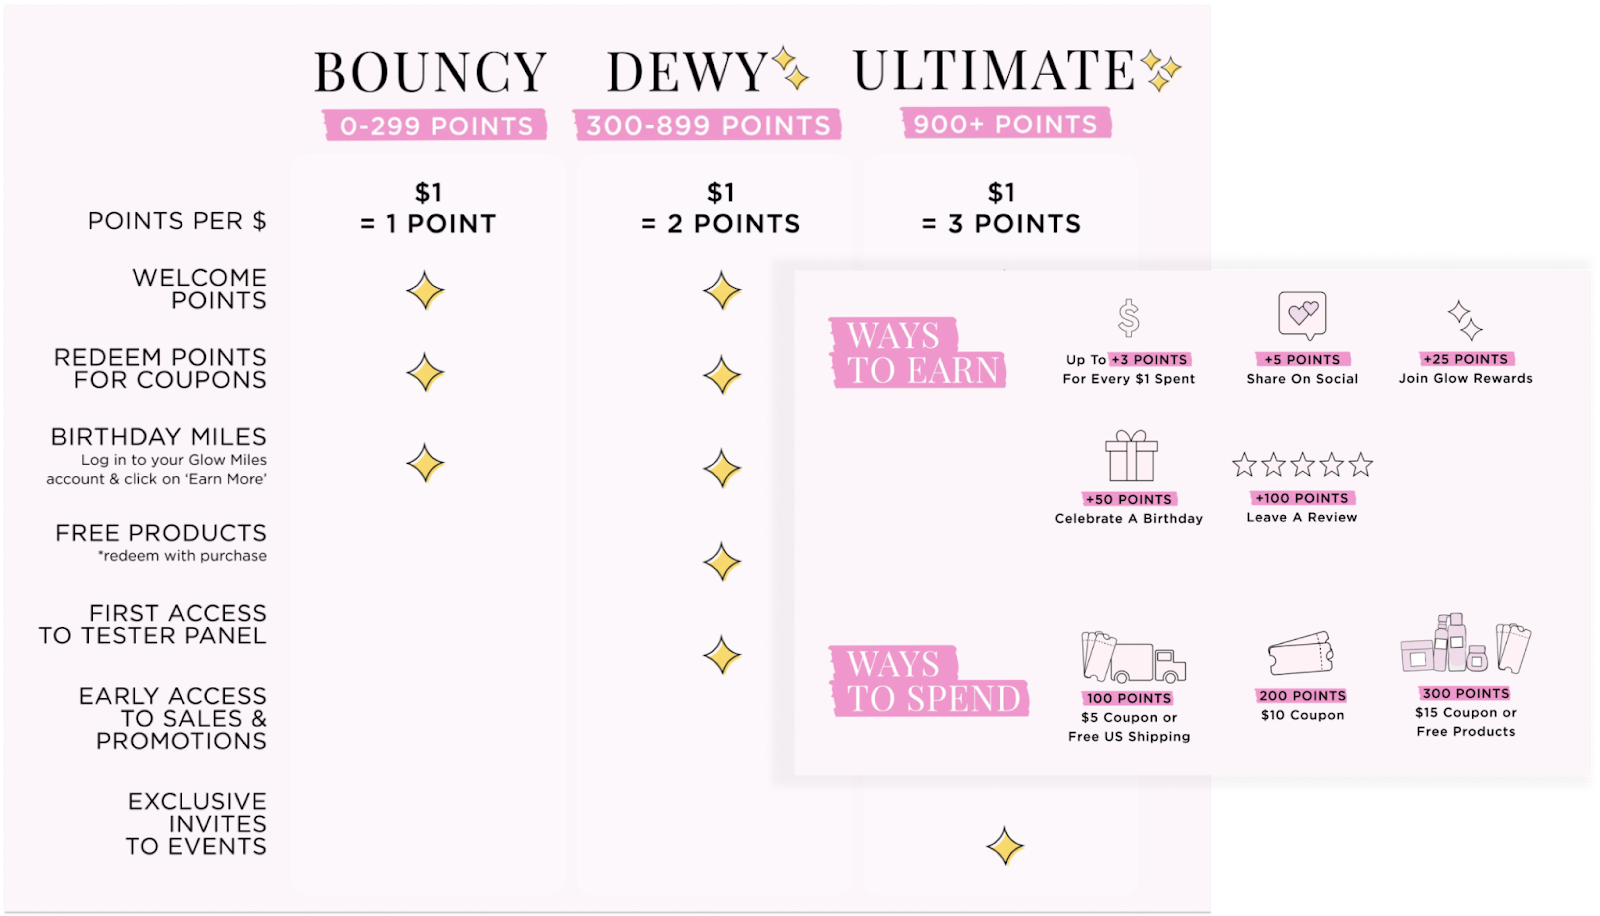 Loyalty Programs in the Beauty Industry–A screenshot of two overlapped images from Glow Recipe’s rewards explainer page. The background image shows their VIP tiers and the rewards available for each tier–Bounce (0-299 points), Dewy (300-899 points), and Ultimate (900+ points). The image in the front shows the ways to earn and ways to spend the points with a corresponding icon for each. The ways to earn are: up to 3 points for every $1 spent, 5 points for a share on social media, 25 points for joining Glow Rewards, 50 points to celebrate a birthday, and 100 points to leave a review. The ways to spend are: 100 points for a $5 coupon or Free US shipping, 200 points for a $10 coupon, and 300 points for a $15 coupon or free products.